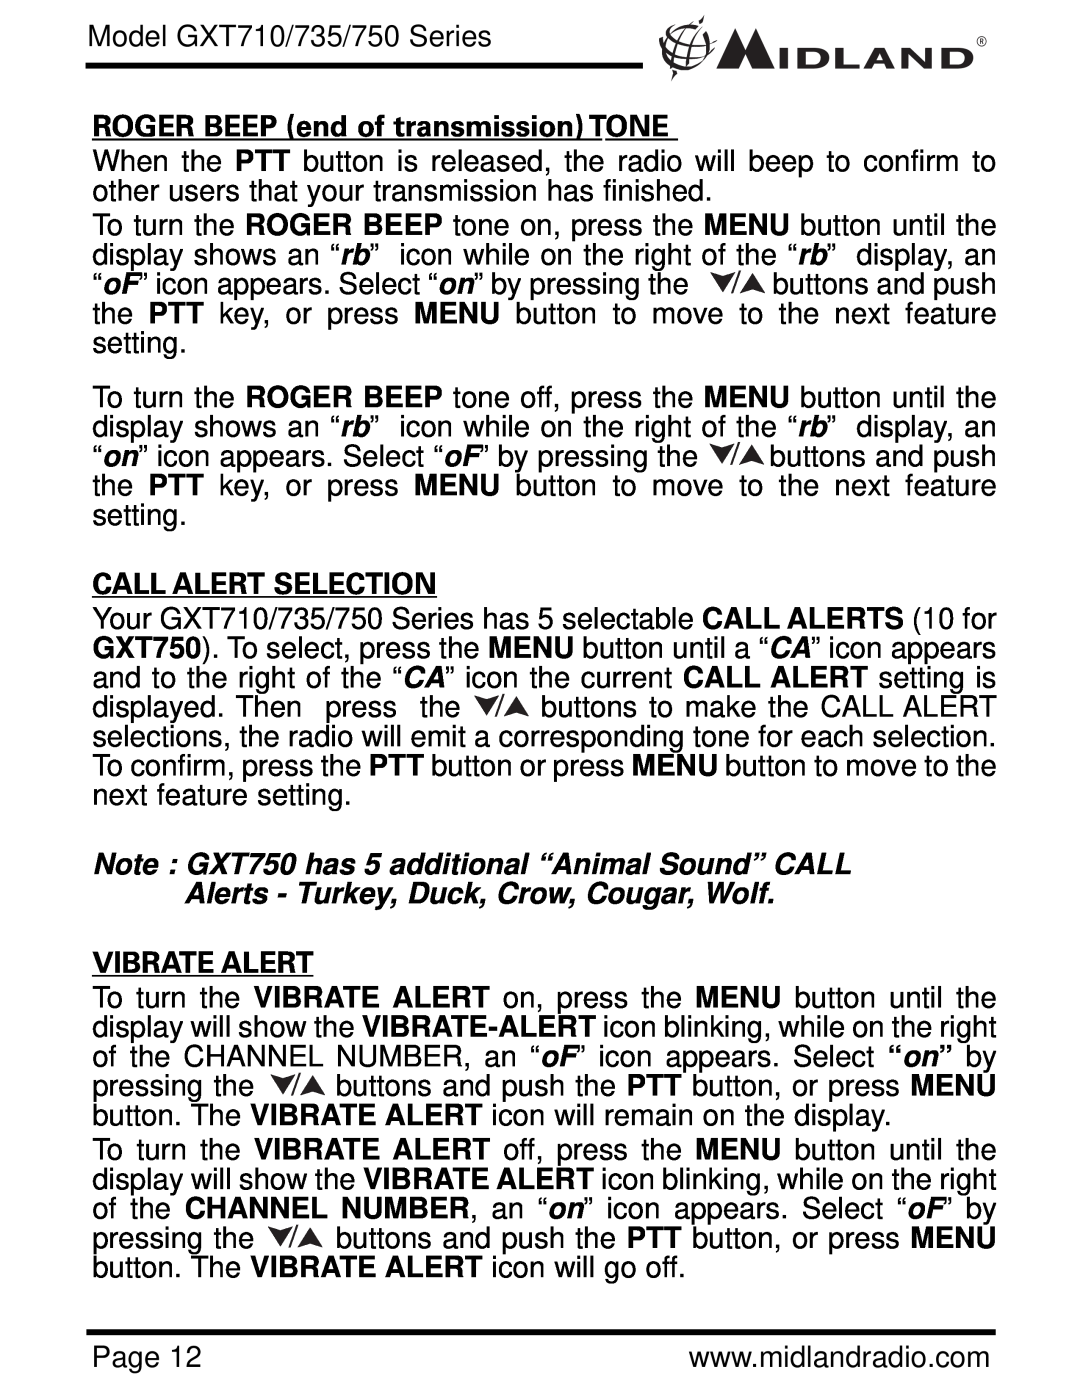 Midland Radio GXT735 Series, GXT710 Series ROGER BEEP end of transmission TONE, Call Alert Selection, Vibrate Alert 